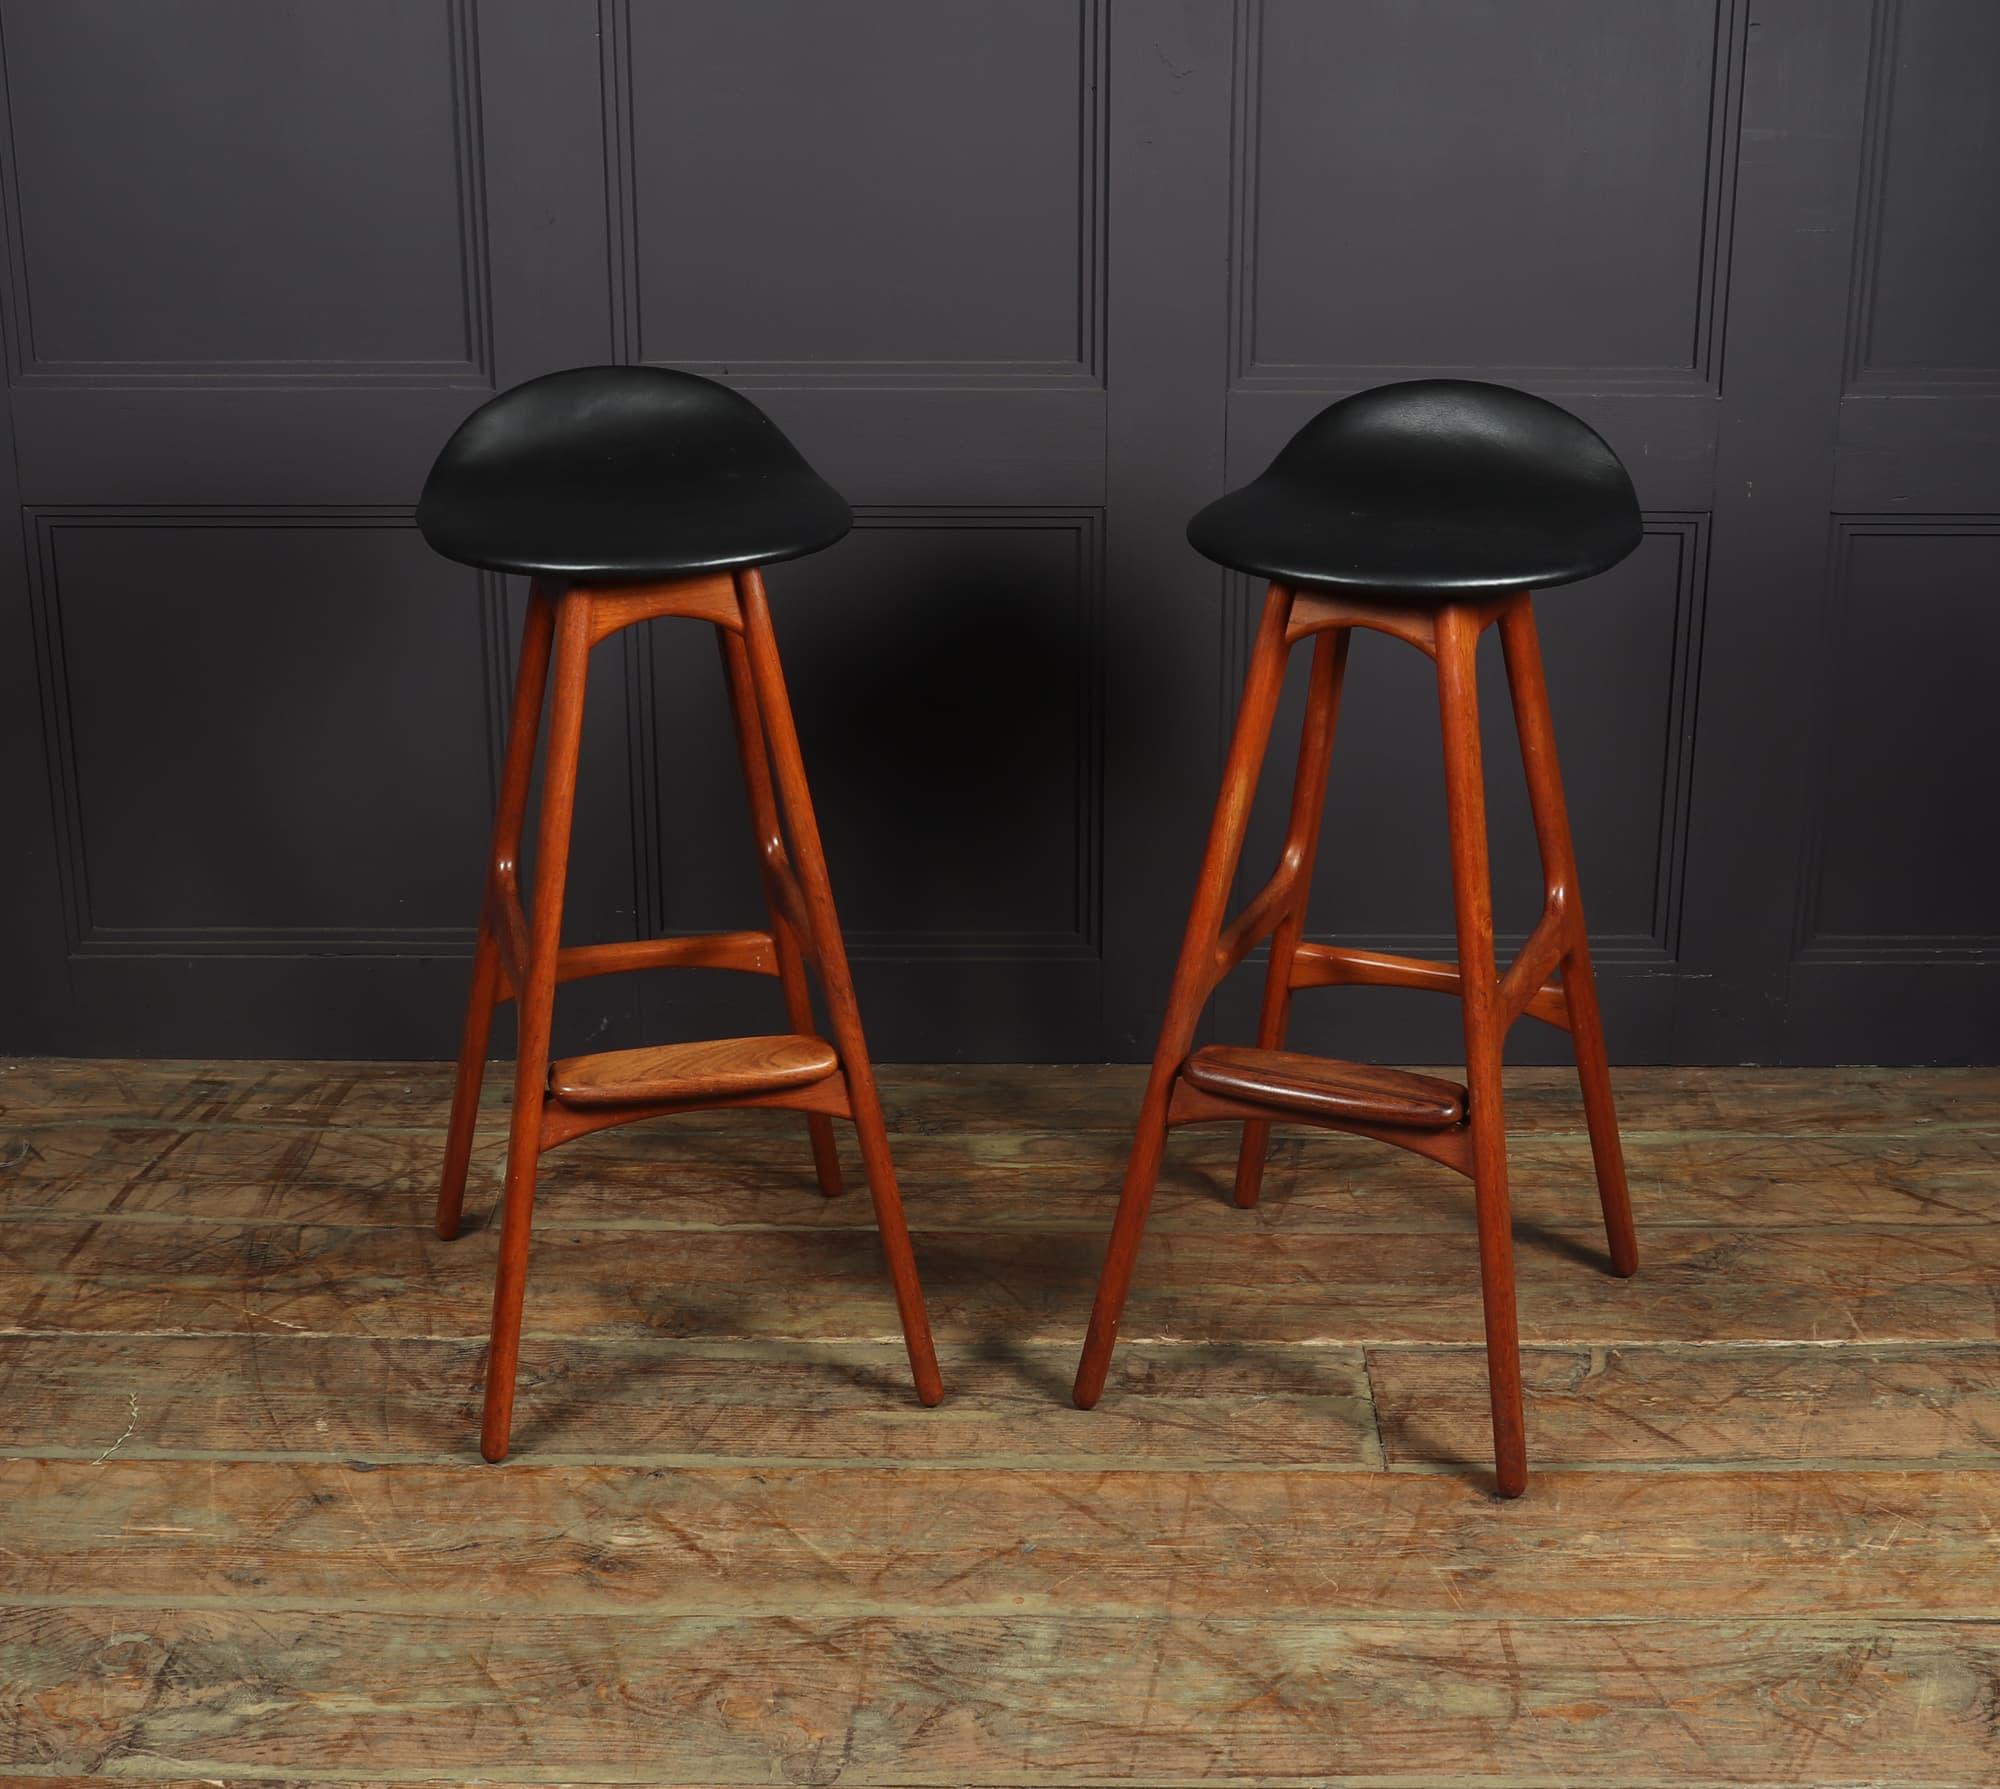 stools by eric buck